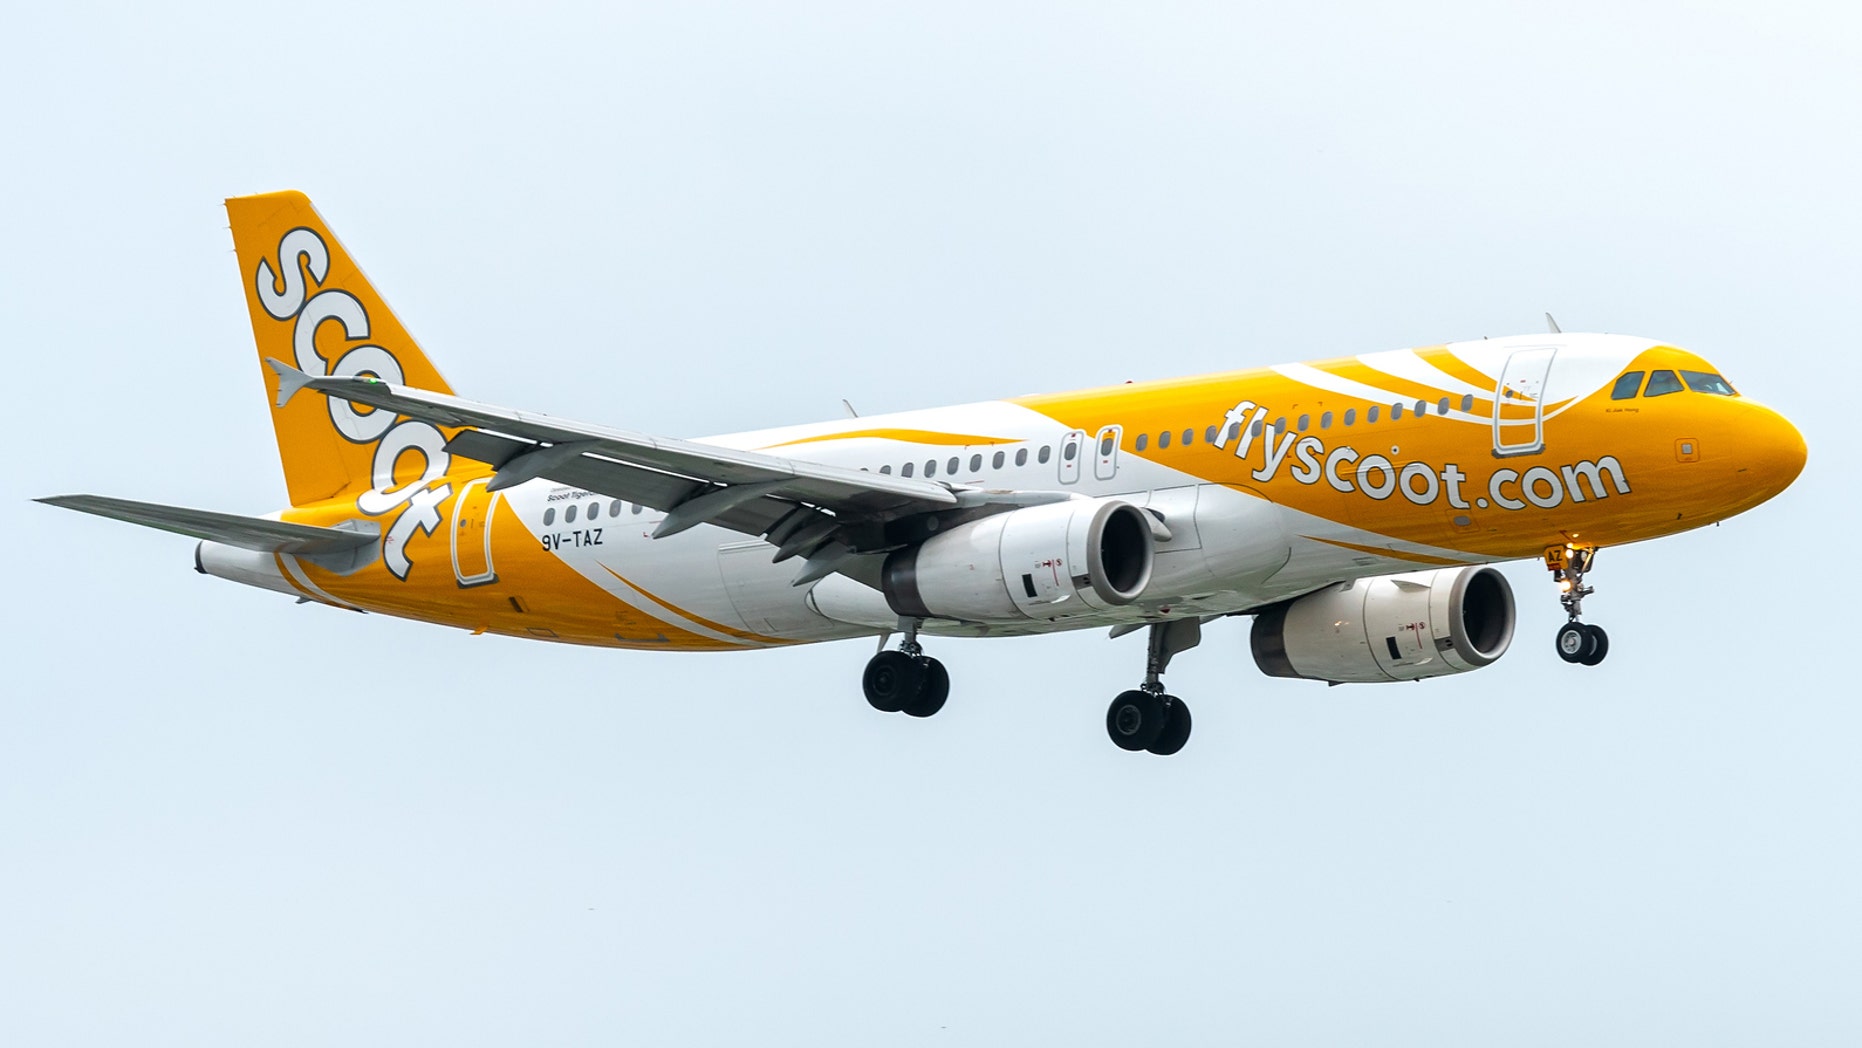 Footage shows Scoot airline passenger brawling with fellow flyers before being subdued